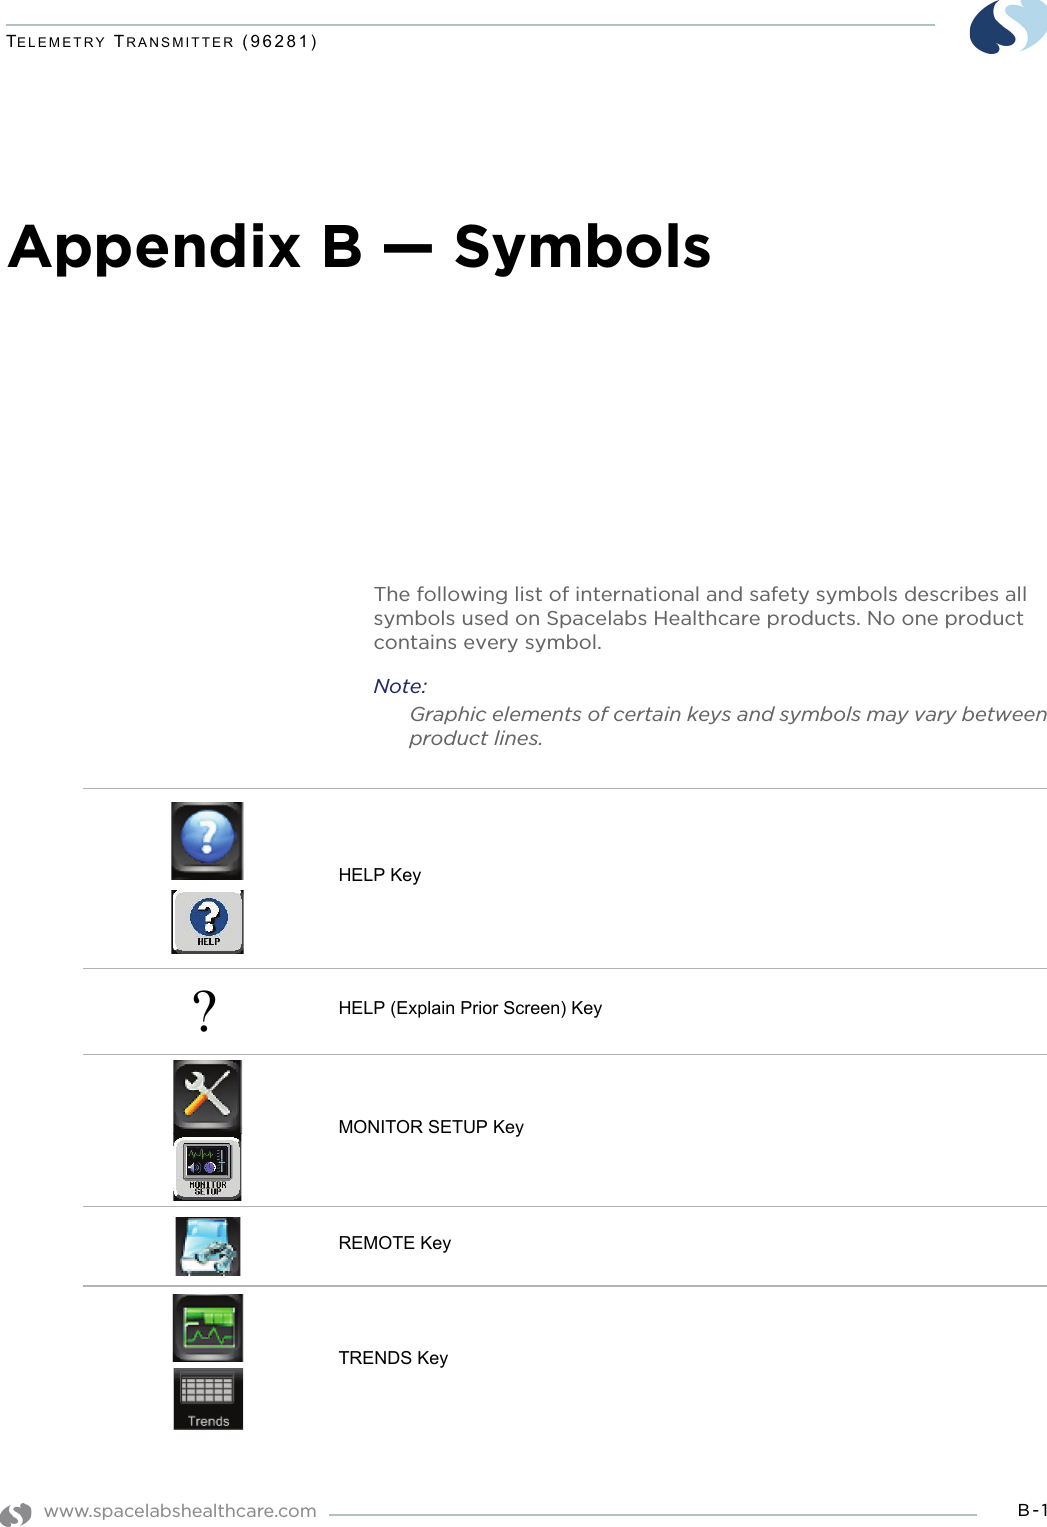 www.spacelabshealthcare.com B-1TELEMETRY TRANSMITTER (96281)Appendix B — SymbolsThe following list of international and safety symbols describes all symbols used on Spacelabs Healthcare products. No one product contains every symbol.Note: Graphic elements of certain keys and symbols may vary between product lines.HELP KeyHELP (Explain Prior Screen) KeyMONITOR SETUP KeyREMOTE KeyTRENDS Key?